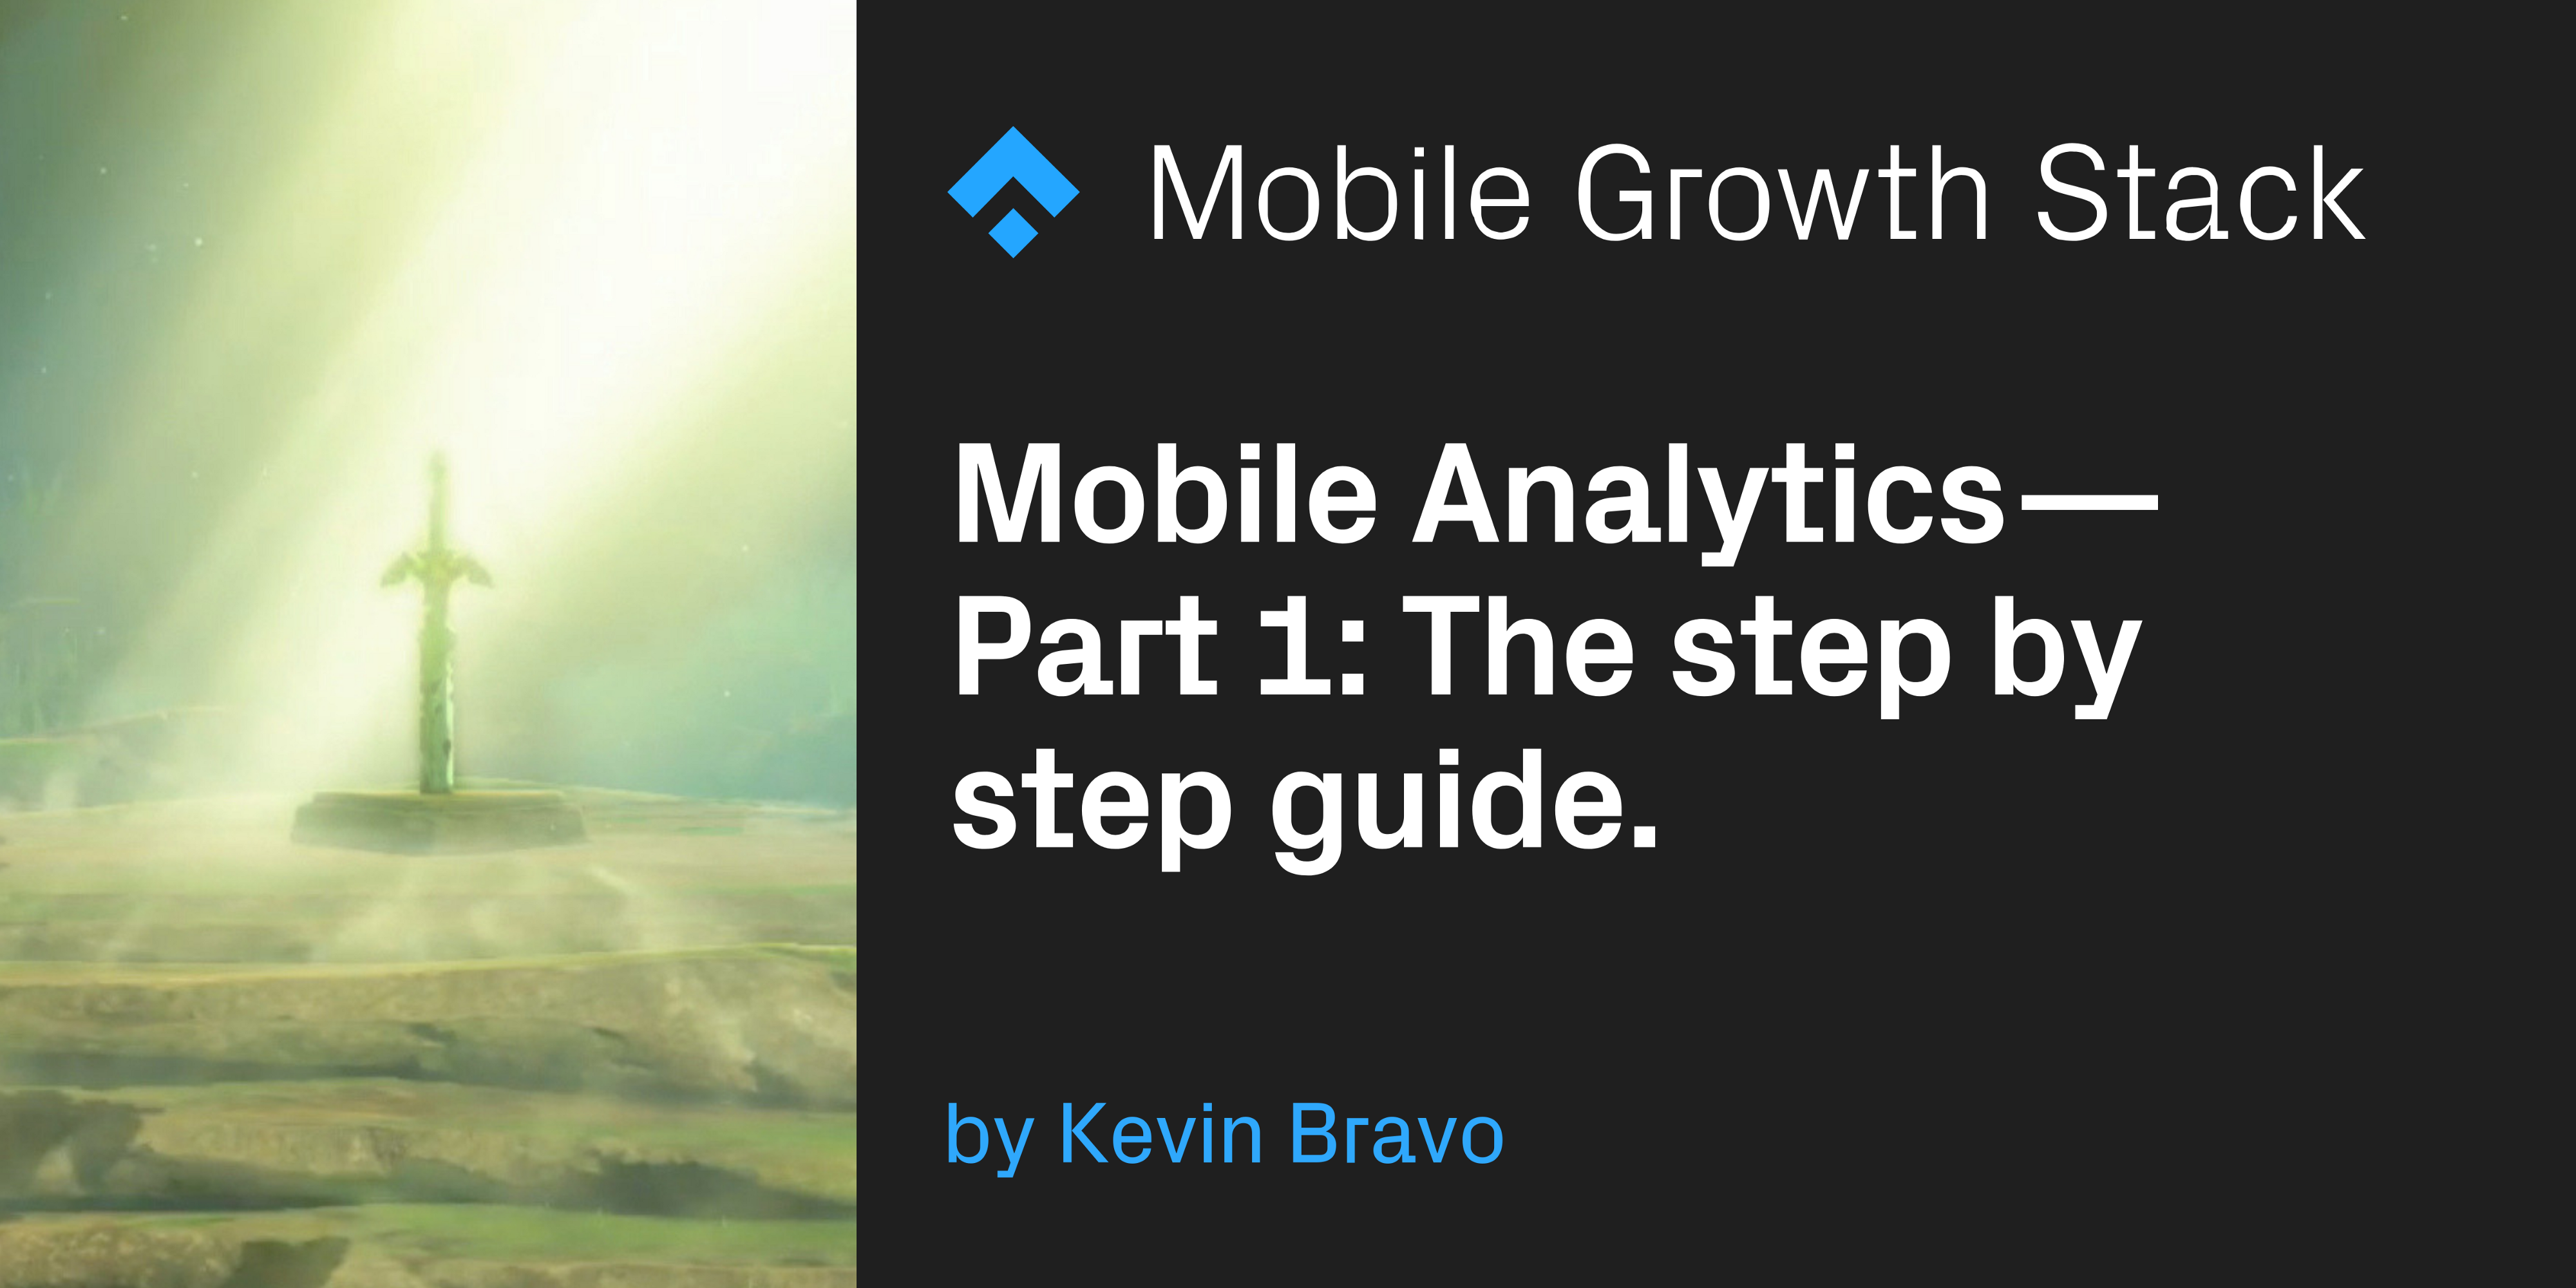 Mobile Analytics — Part 1: The step by step guide.